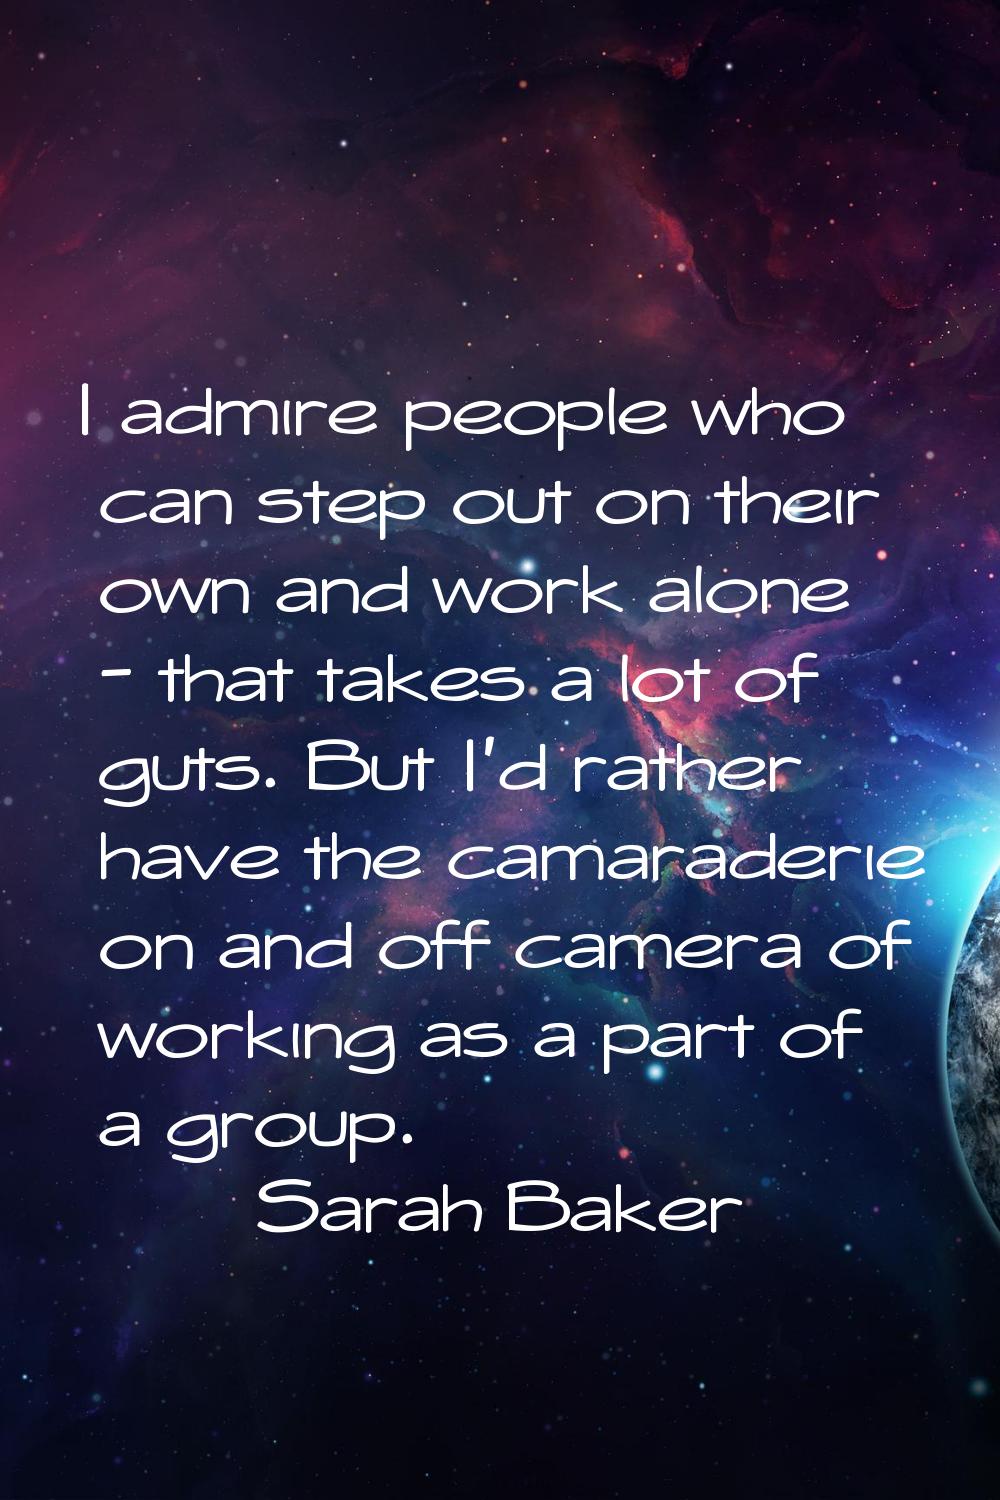 I admire people who can step out on their own and work alone - that takes a lot of guts. But I'd ra